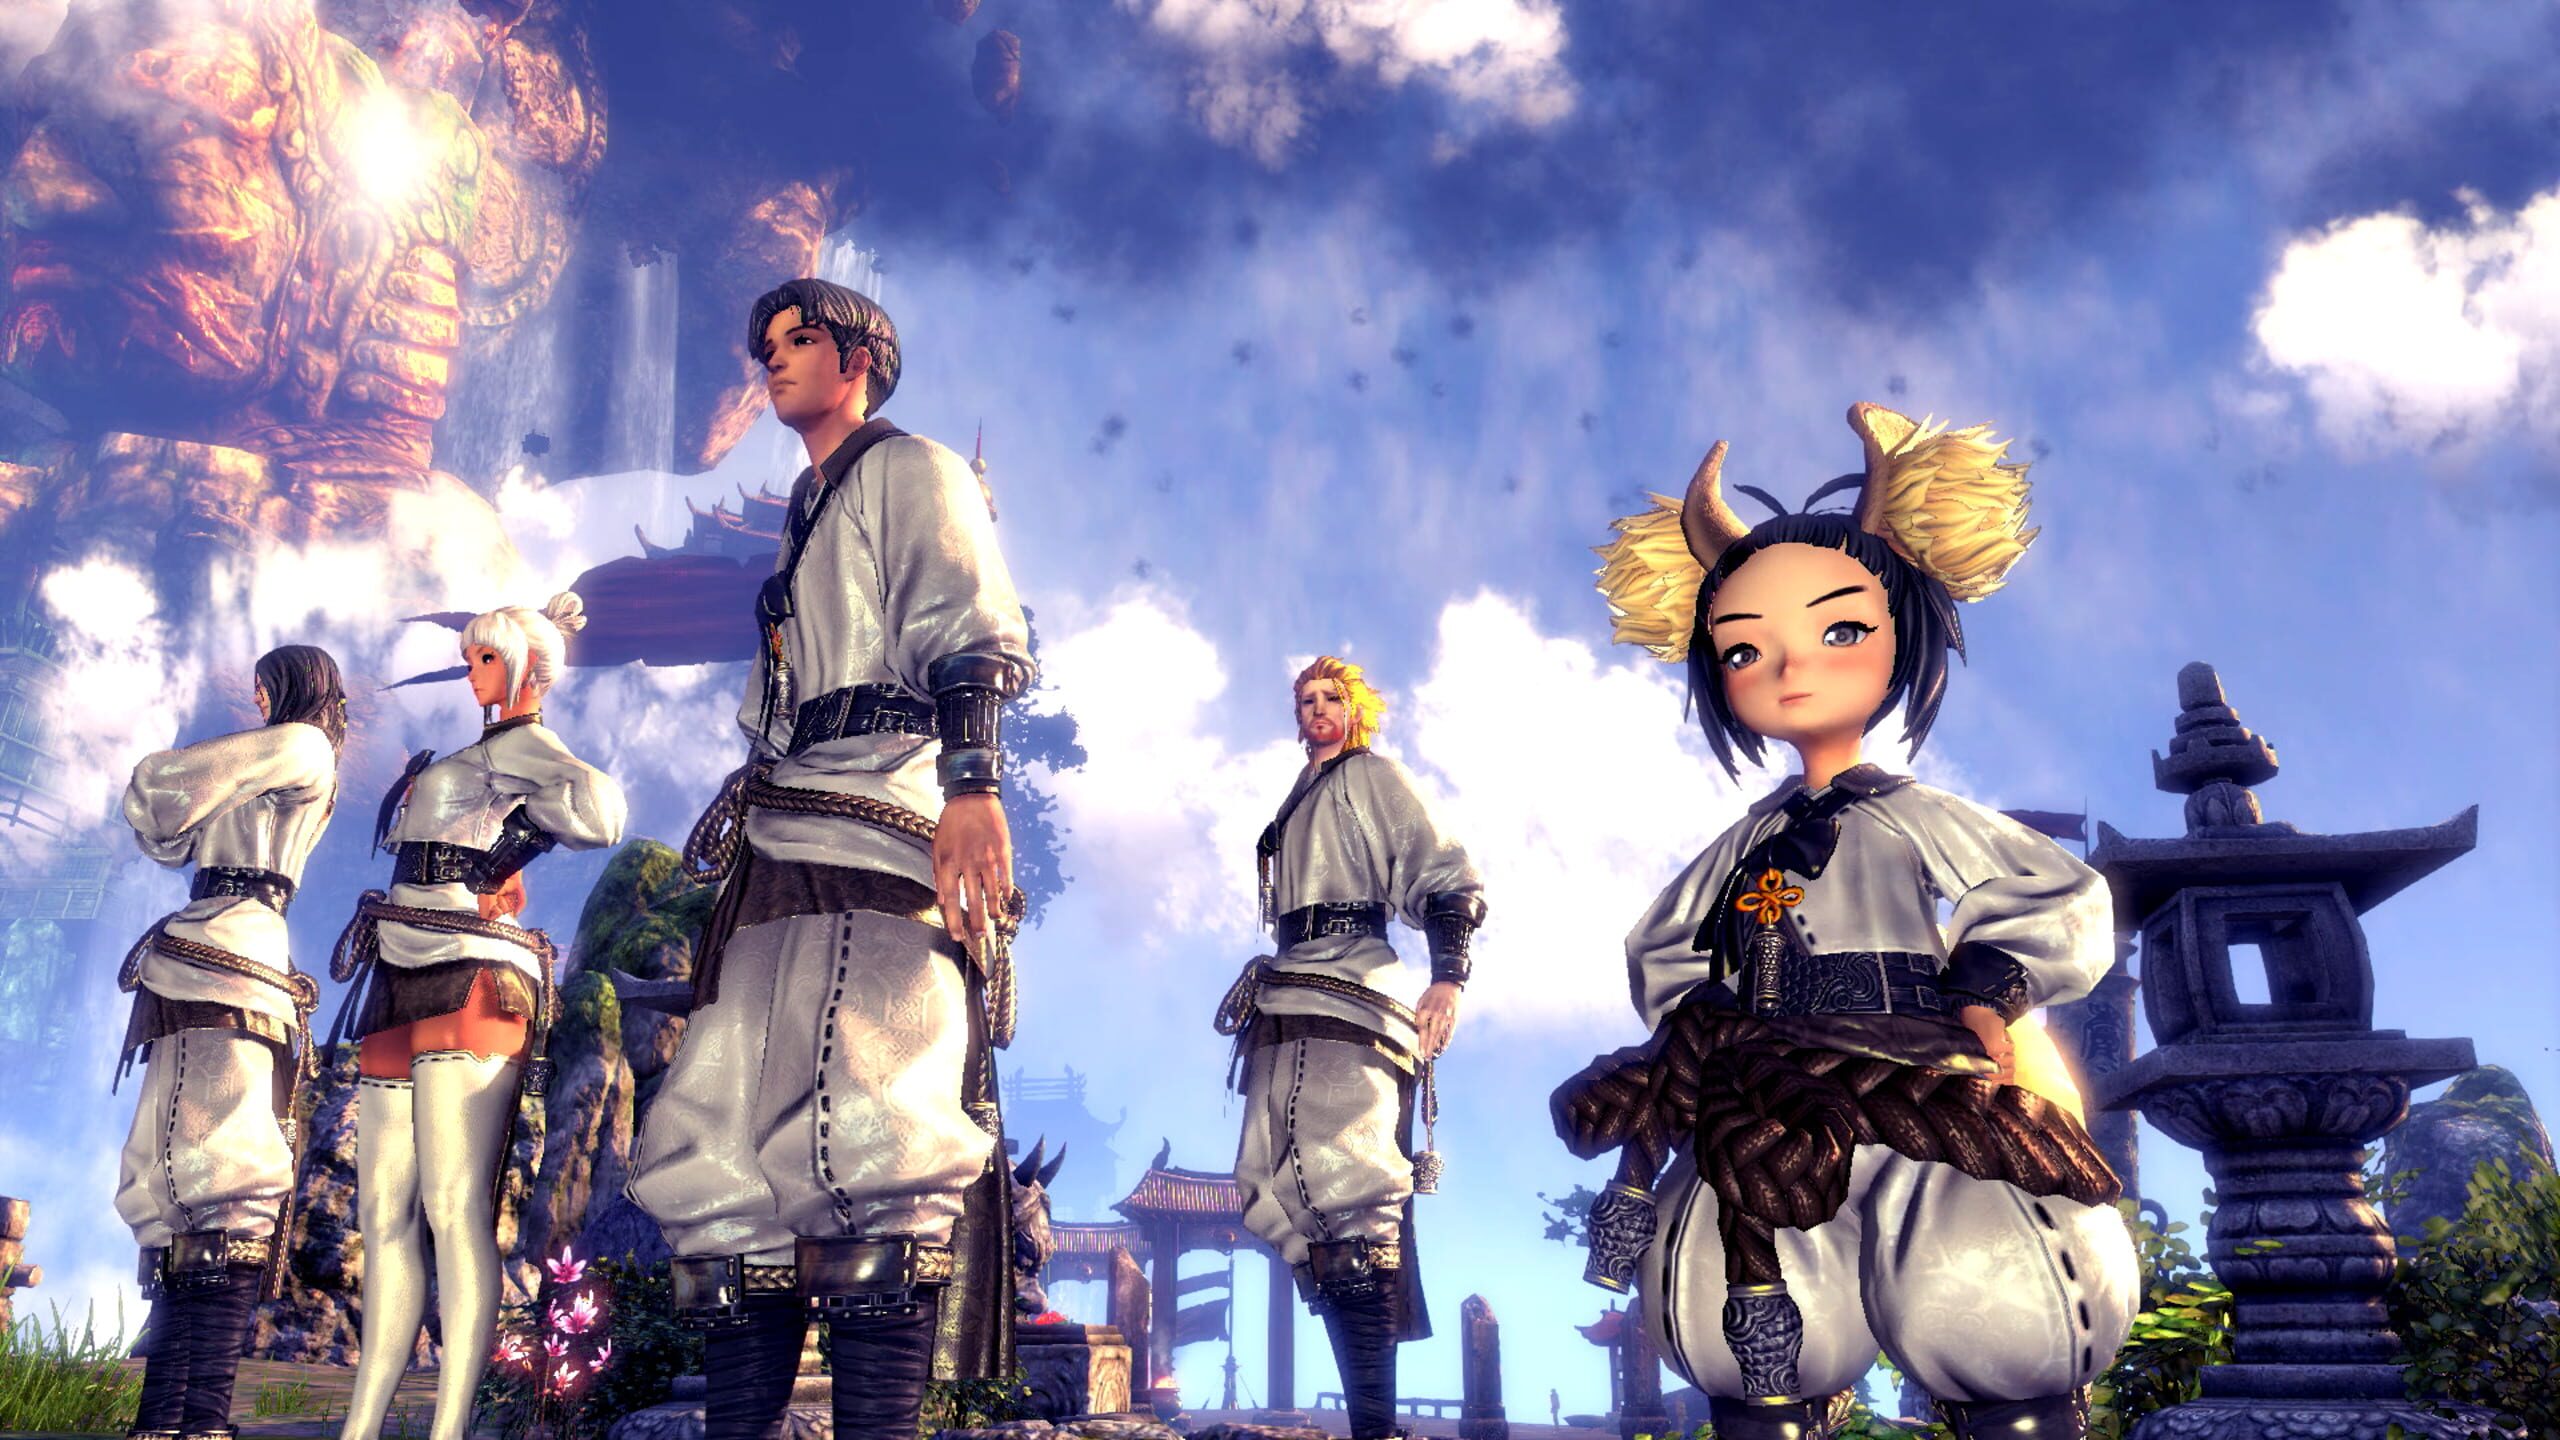 Blade and soul 2. Blade & Soul. MMORPG Blade and Soul. Блад энд соул игра. Blade and Soul 2022.